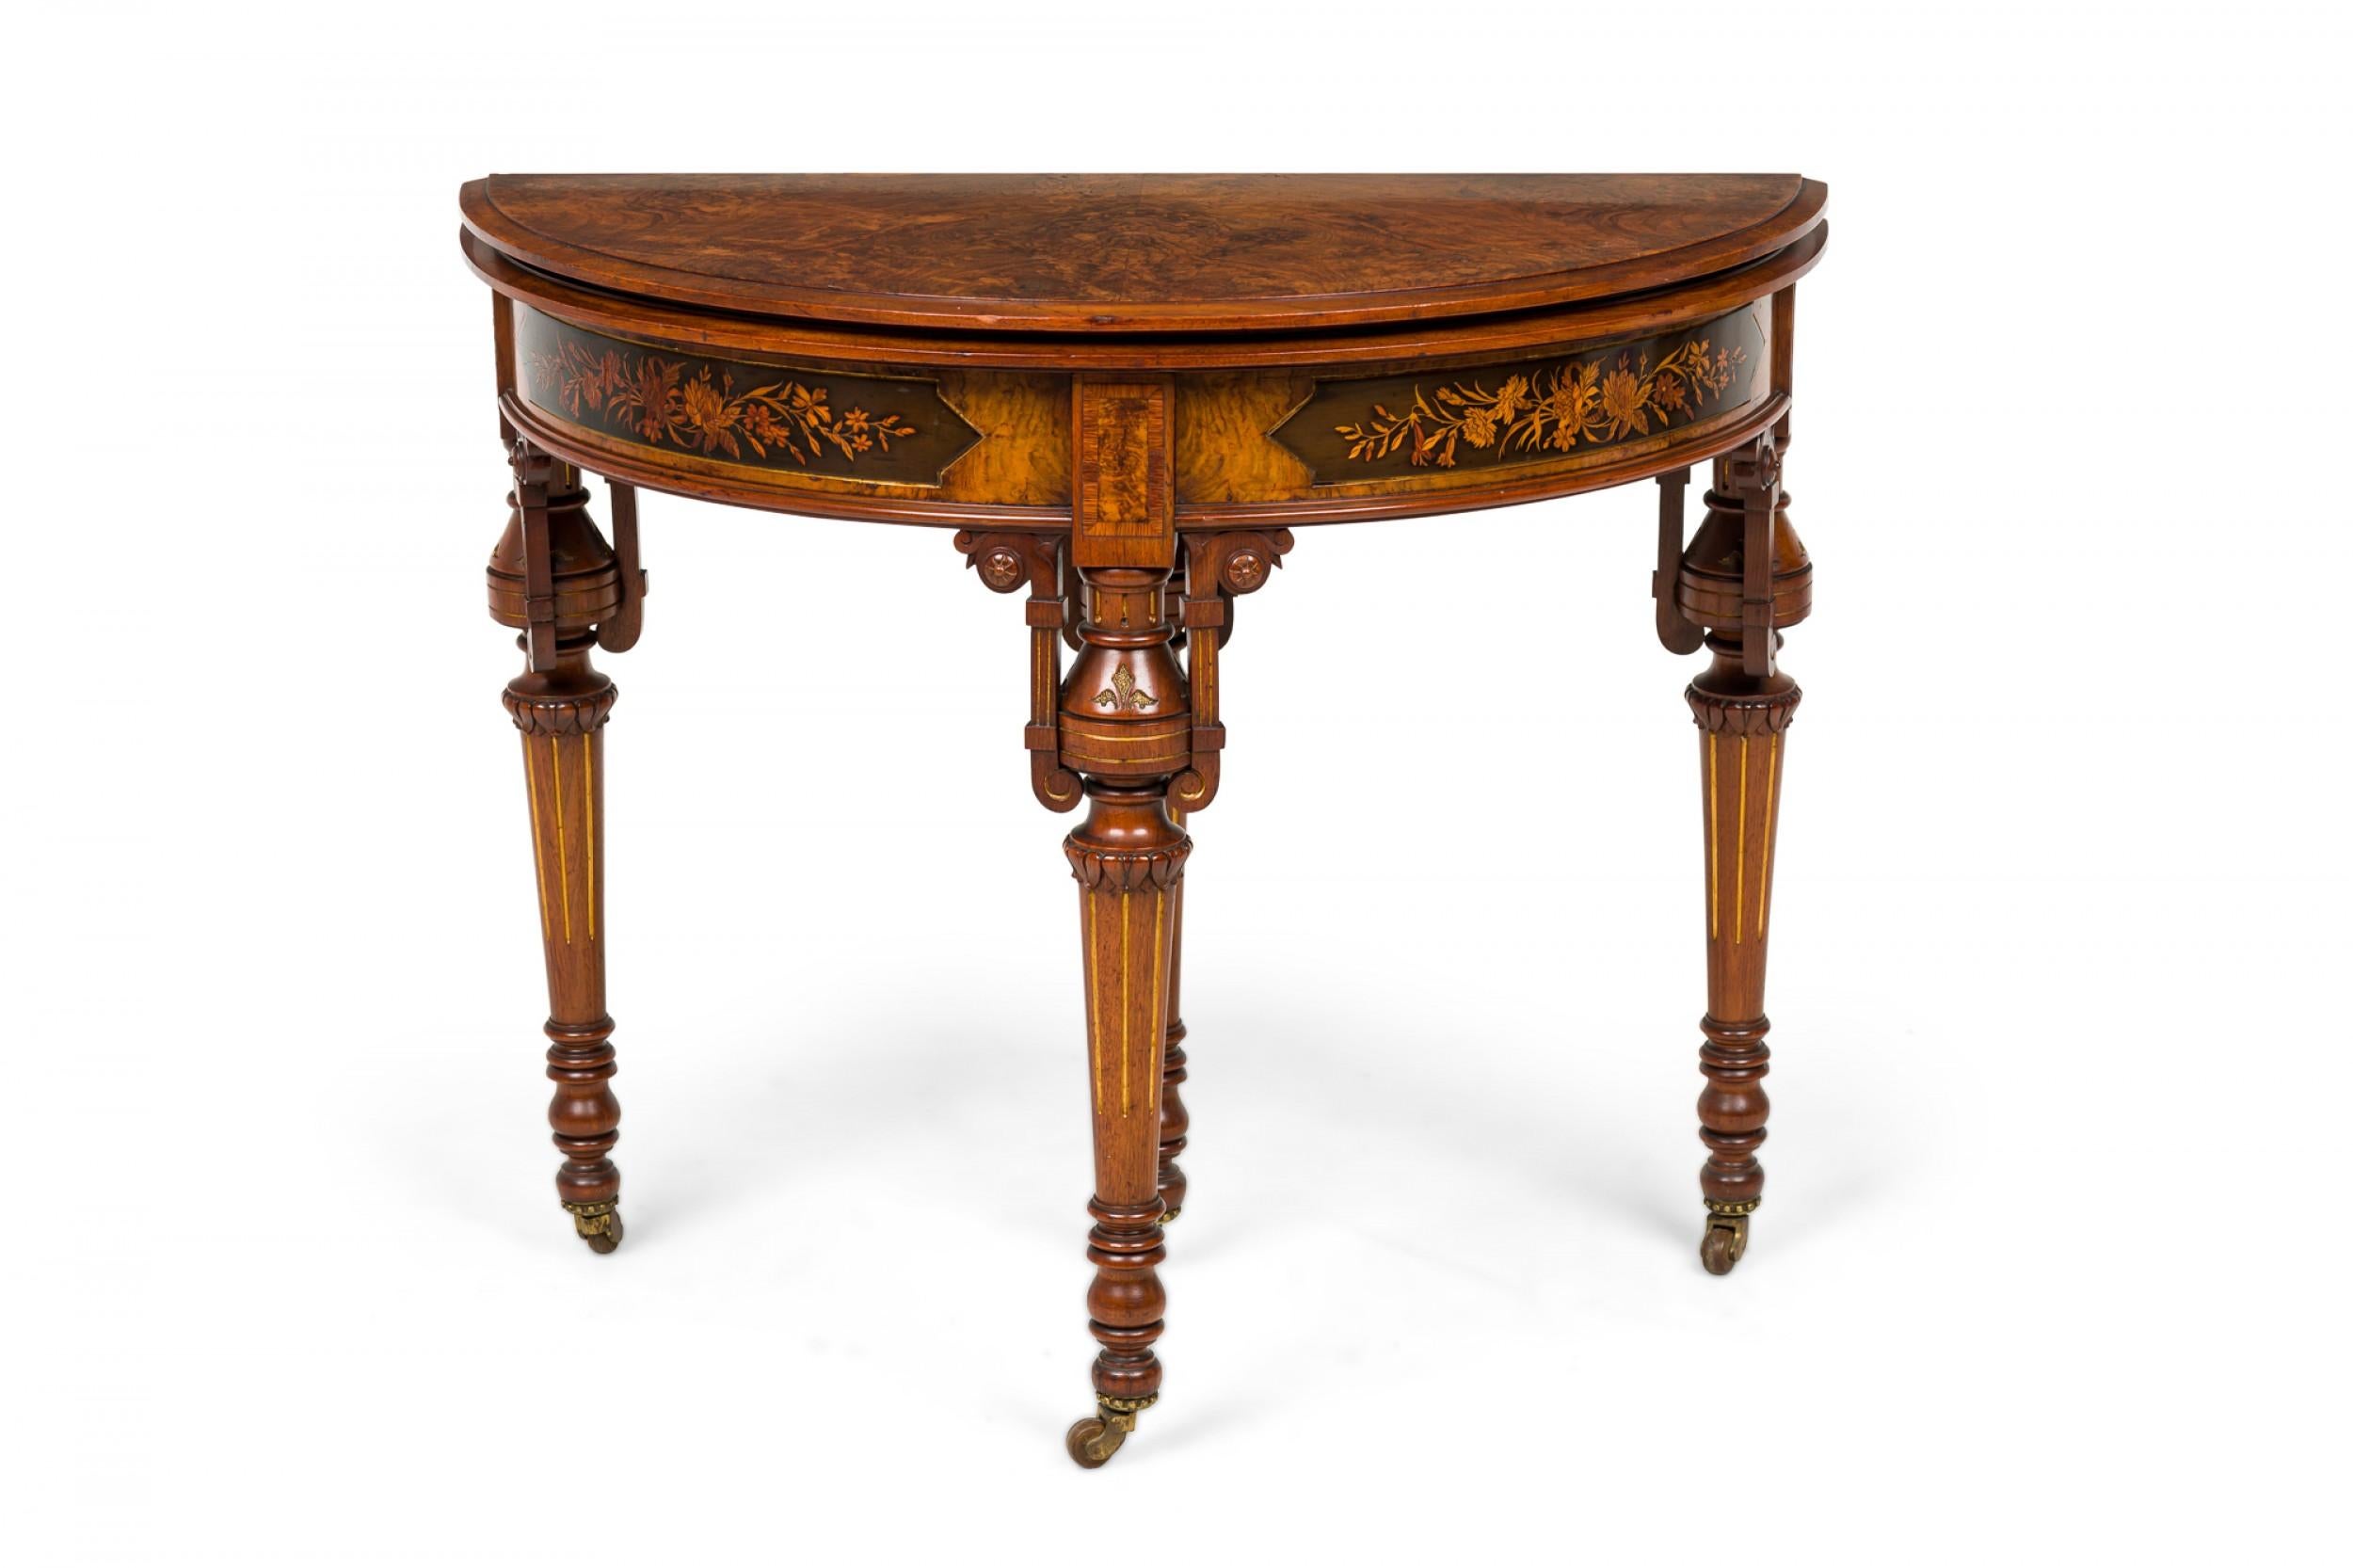 19th Century American Victorian Folding Wood Demilune Console Table with Extendable Top For Sale